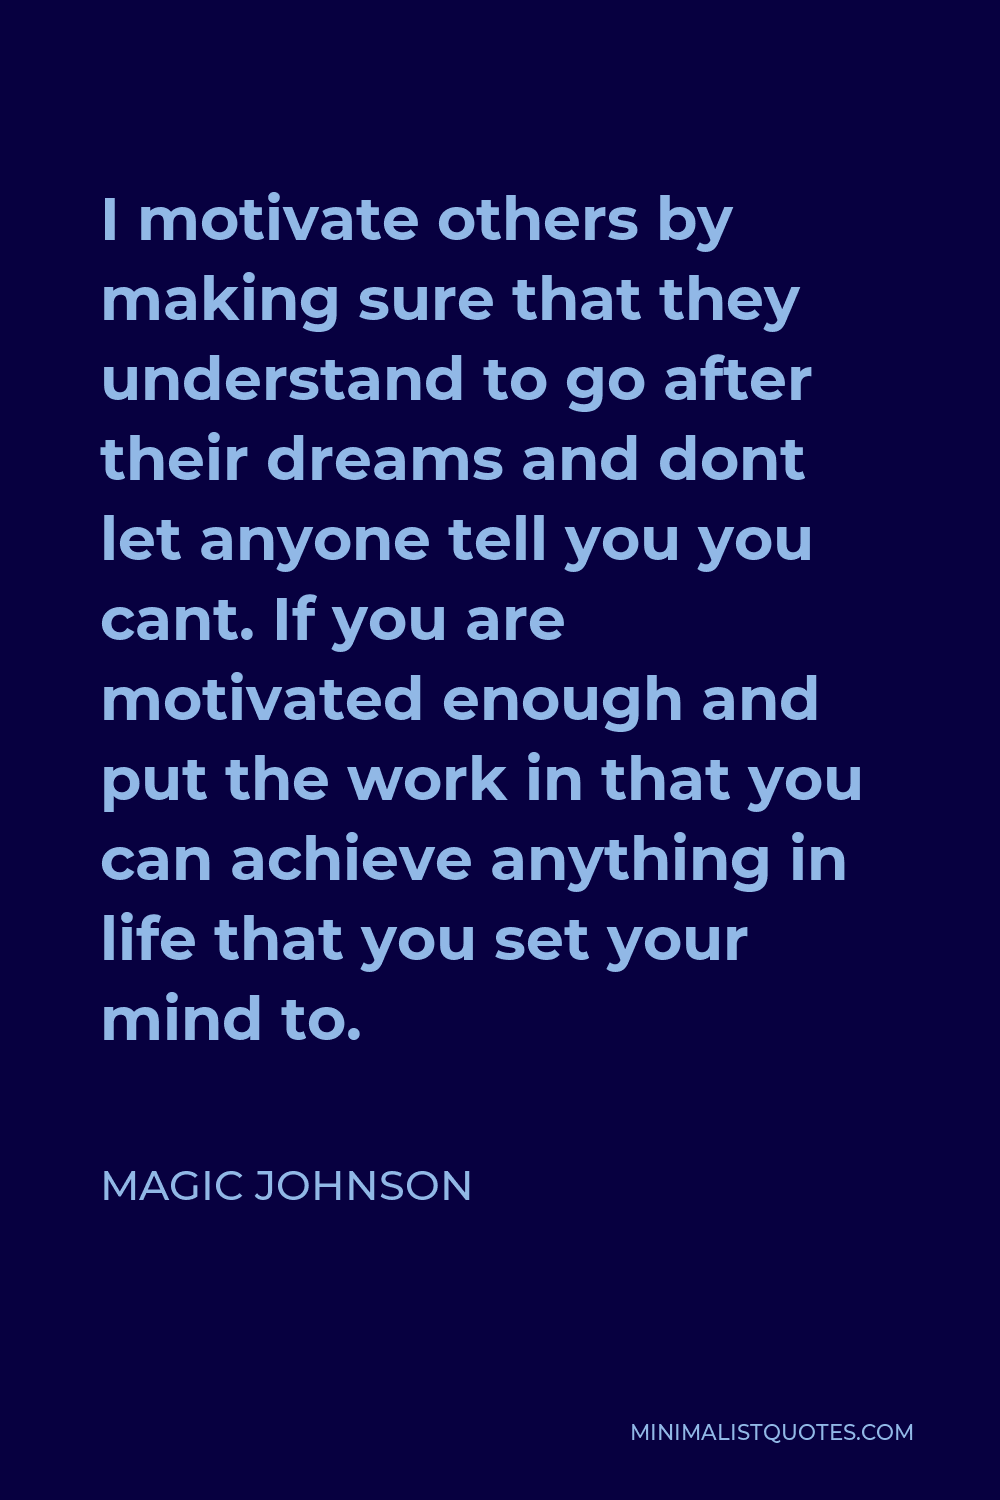 Magic Johnson Quote - I motivate others by making sure that they understand to go after their dreams and dont let anyone tell you you cant. If you are motivated enough and put the work in that you can achieve anything in life that you set your mind to.